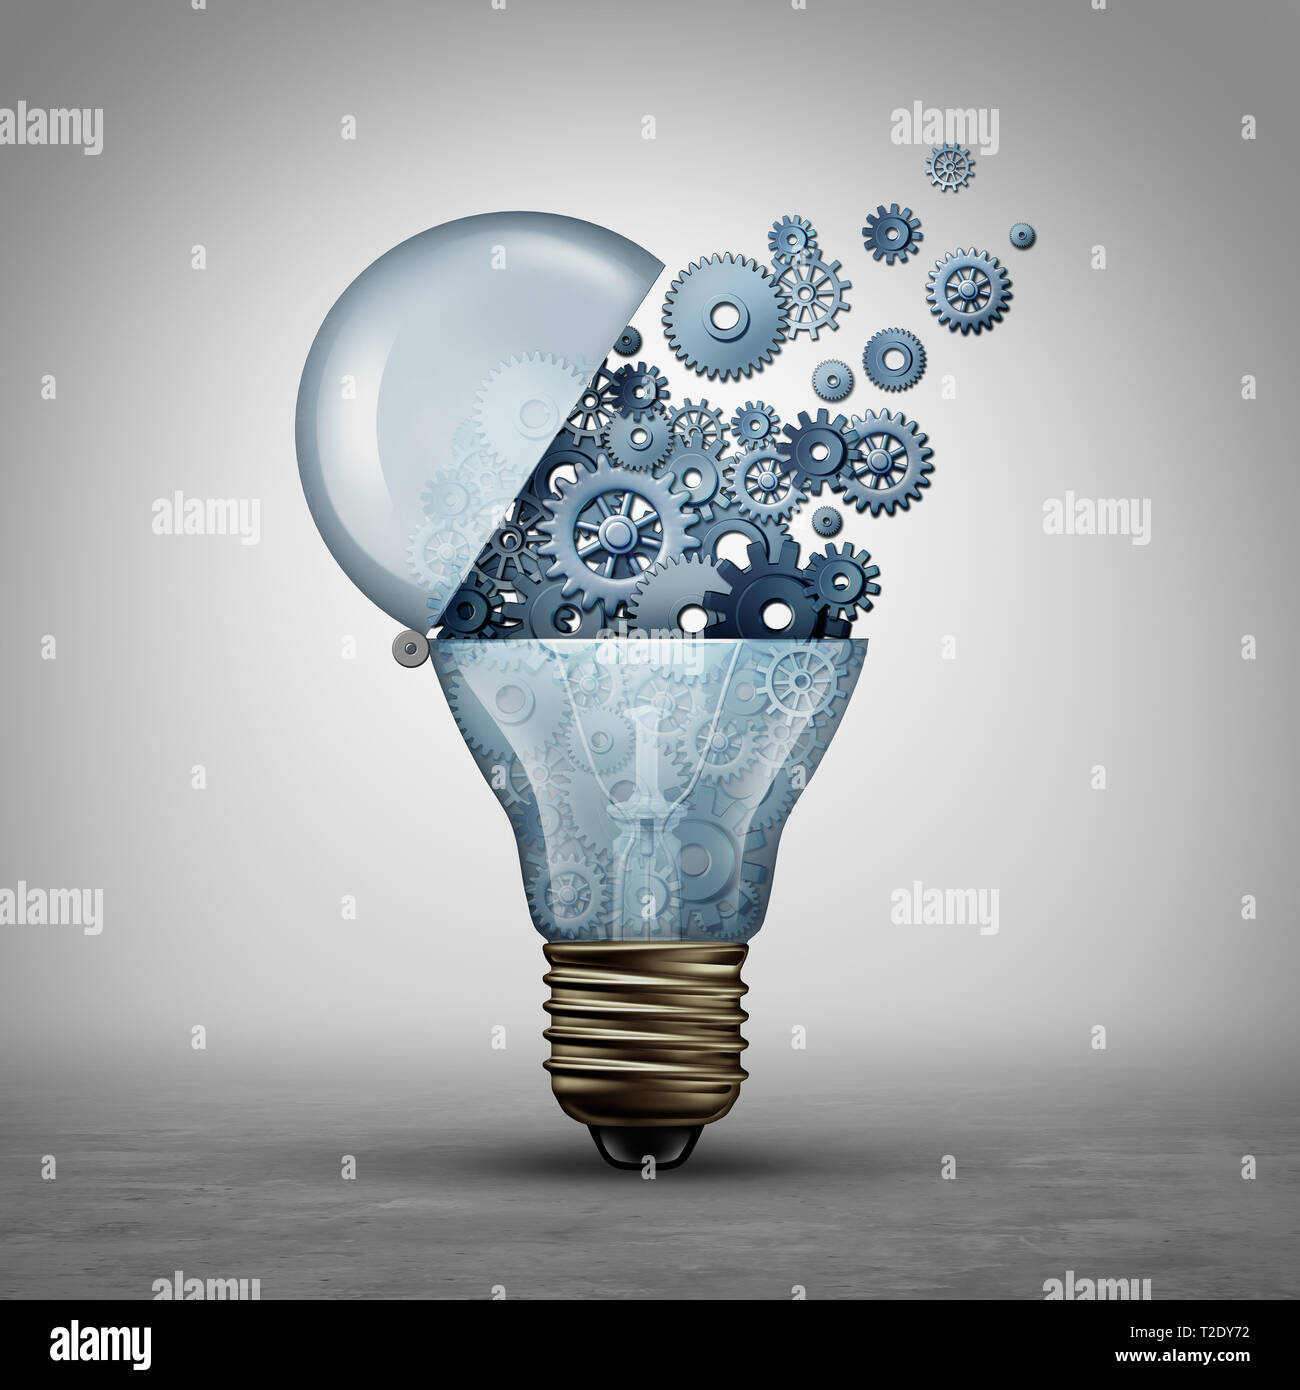 Creative technology concept and communication ideas as an open door light bulb tranfering gears and cogs as a  business success metaphor. Stock Photo